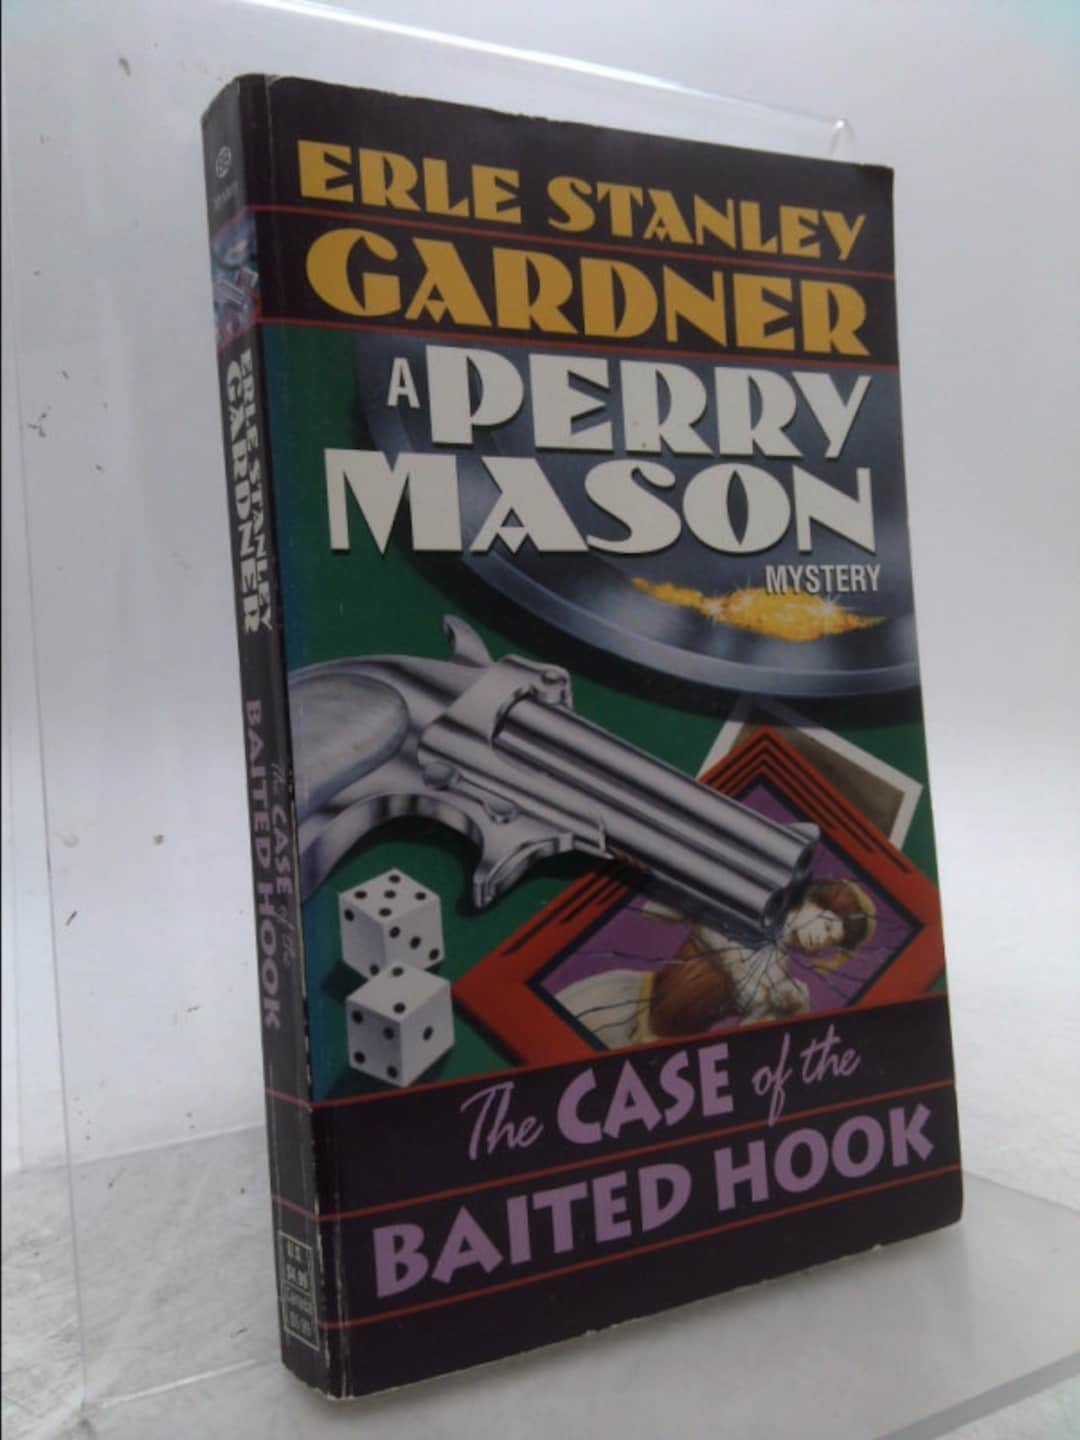 Buy The Case Of The Baited Hook (Perry Mason Books Series) book